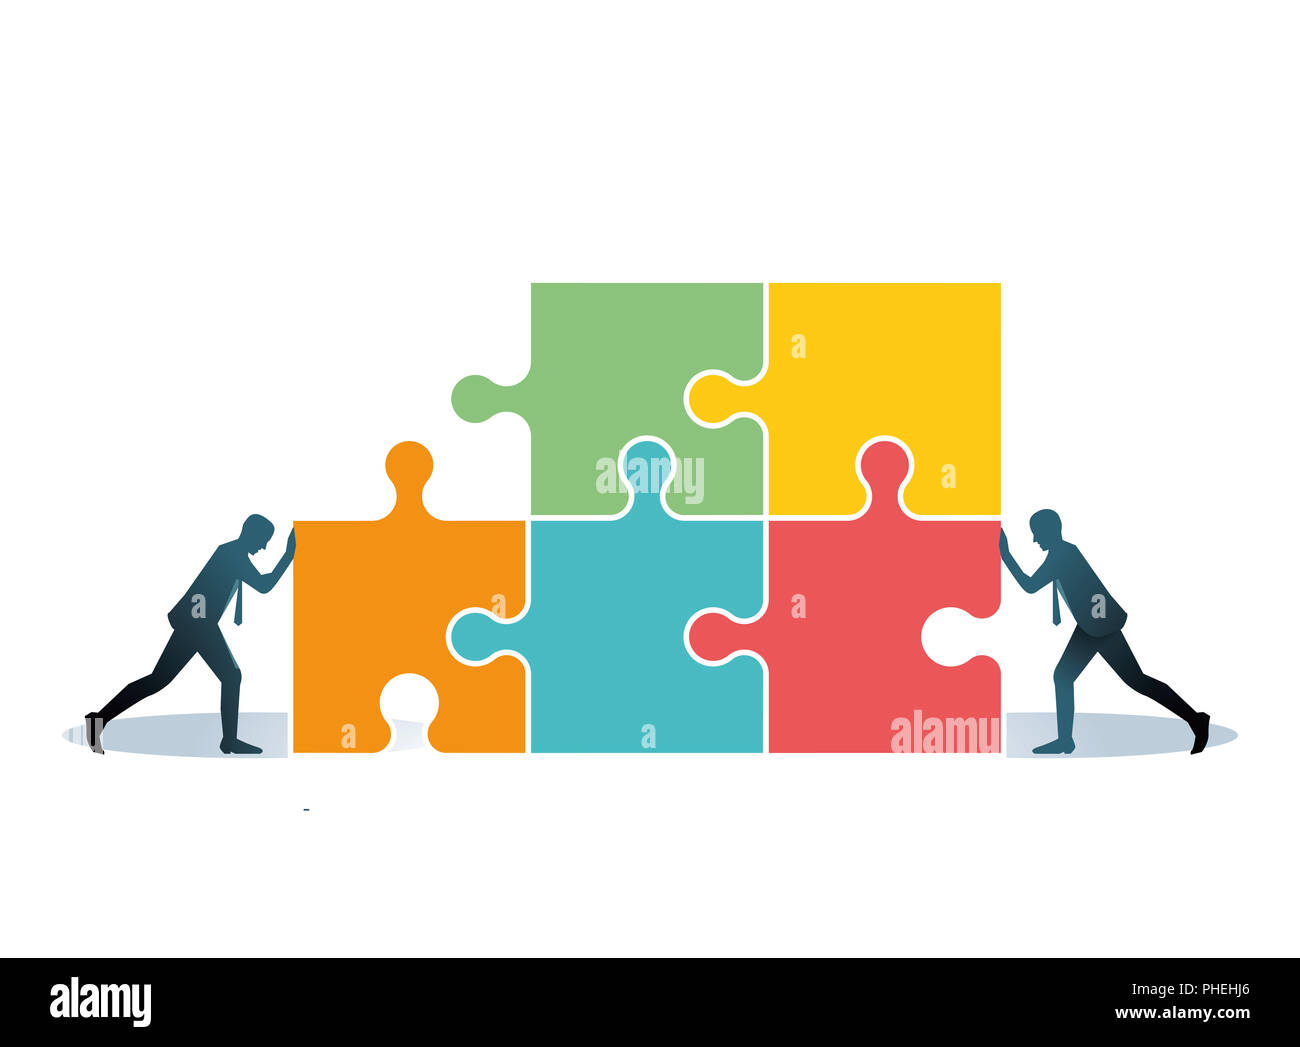 Collaborate and connect, illustration Stock Photo